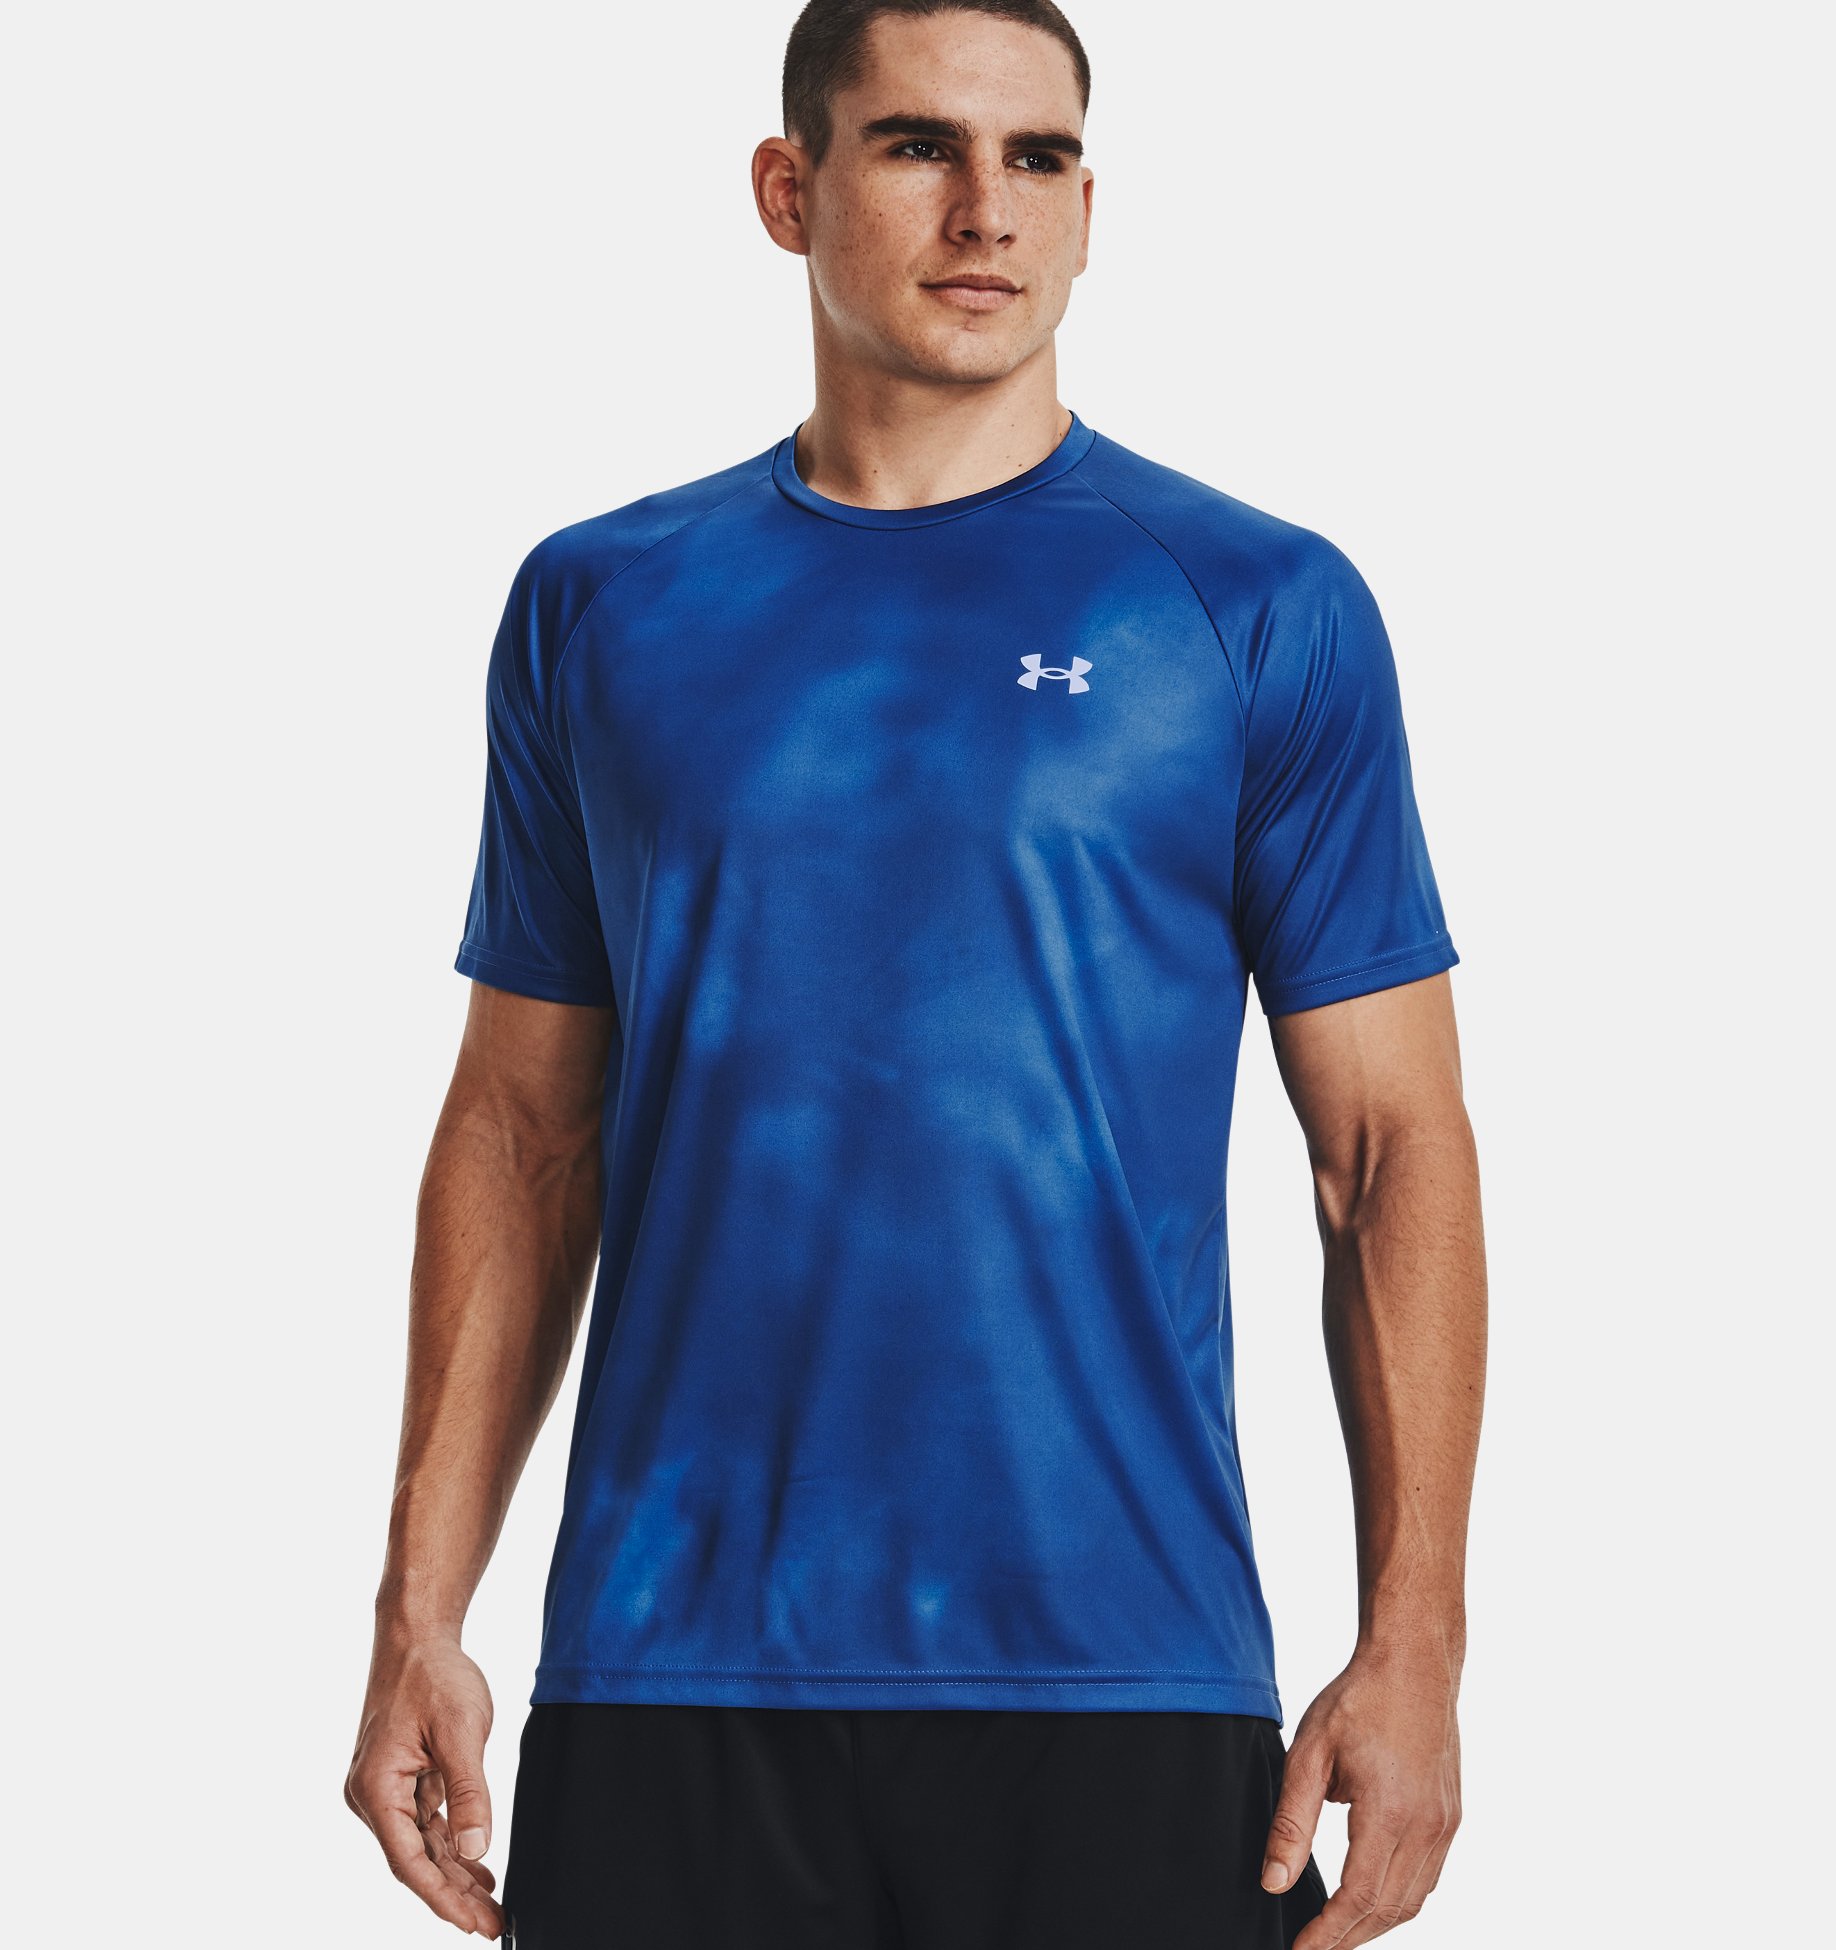 Under Armour Mens Sportstyle Printed Short Sleeve